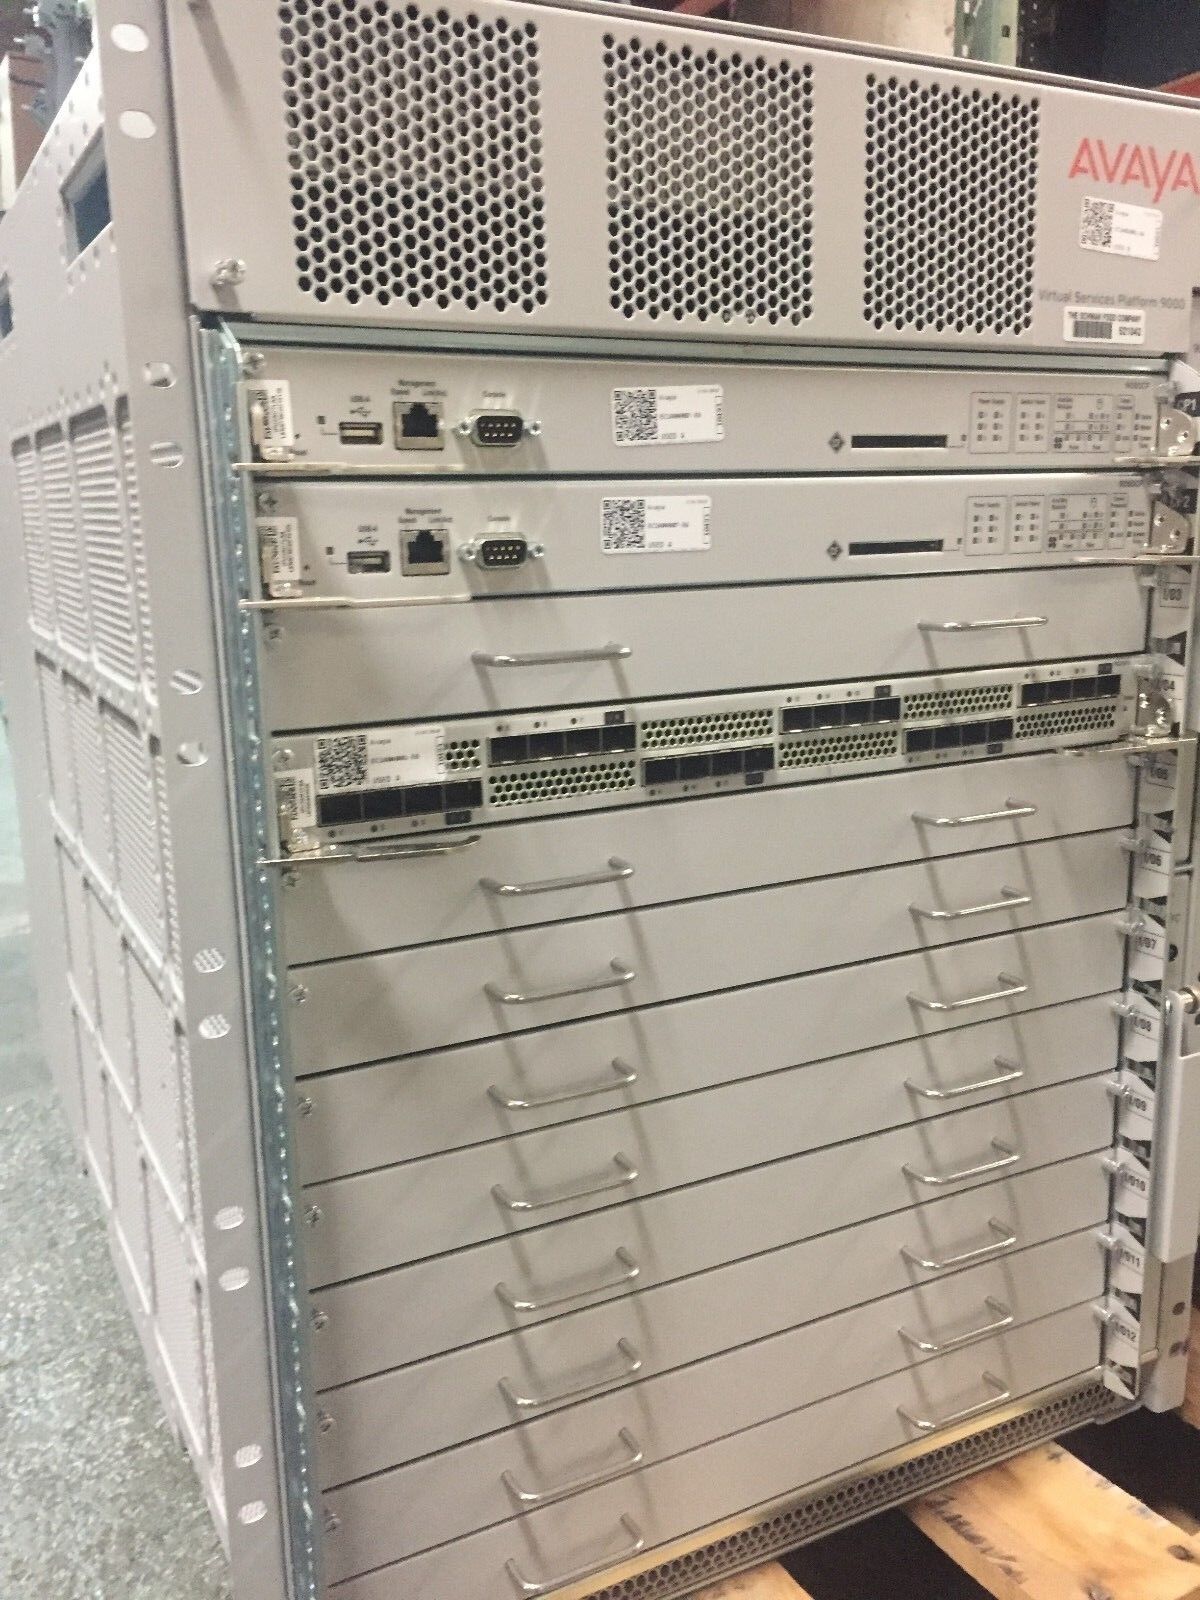 Avaya EC1402001-E6 9012 VSP9000 Chassis with 2x CP, 4x SF, 4x PWR,, Fans